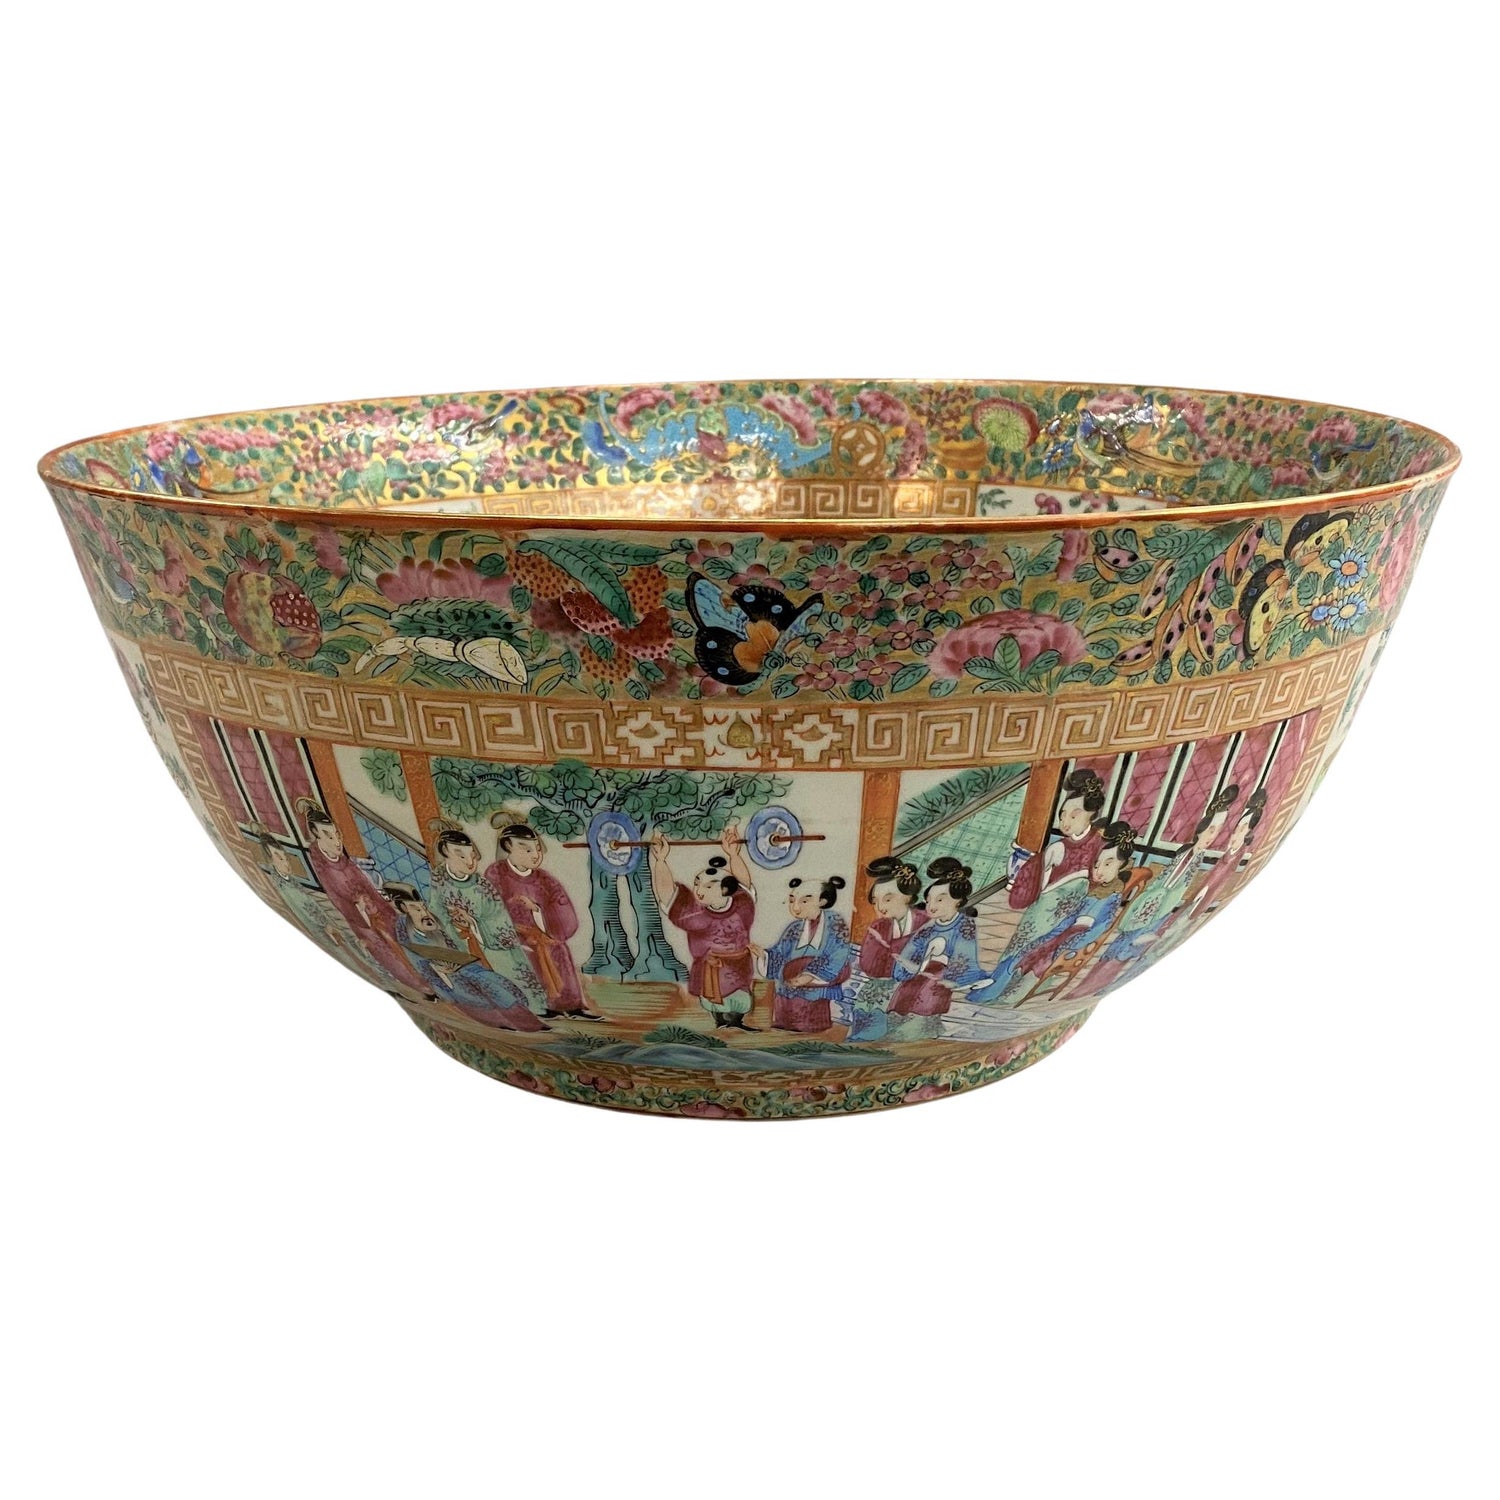 Exceptional Virgil Cantini Enamel Bowl at 1stDibs